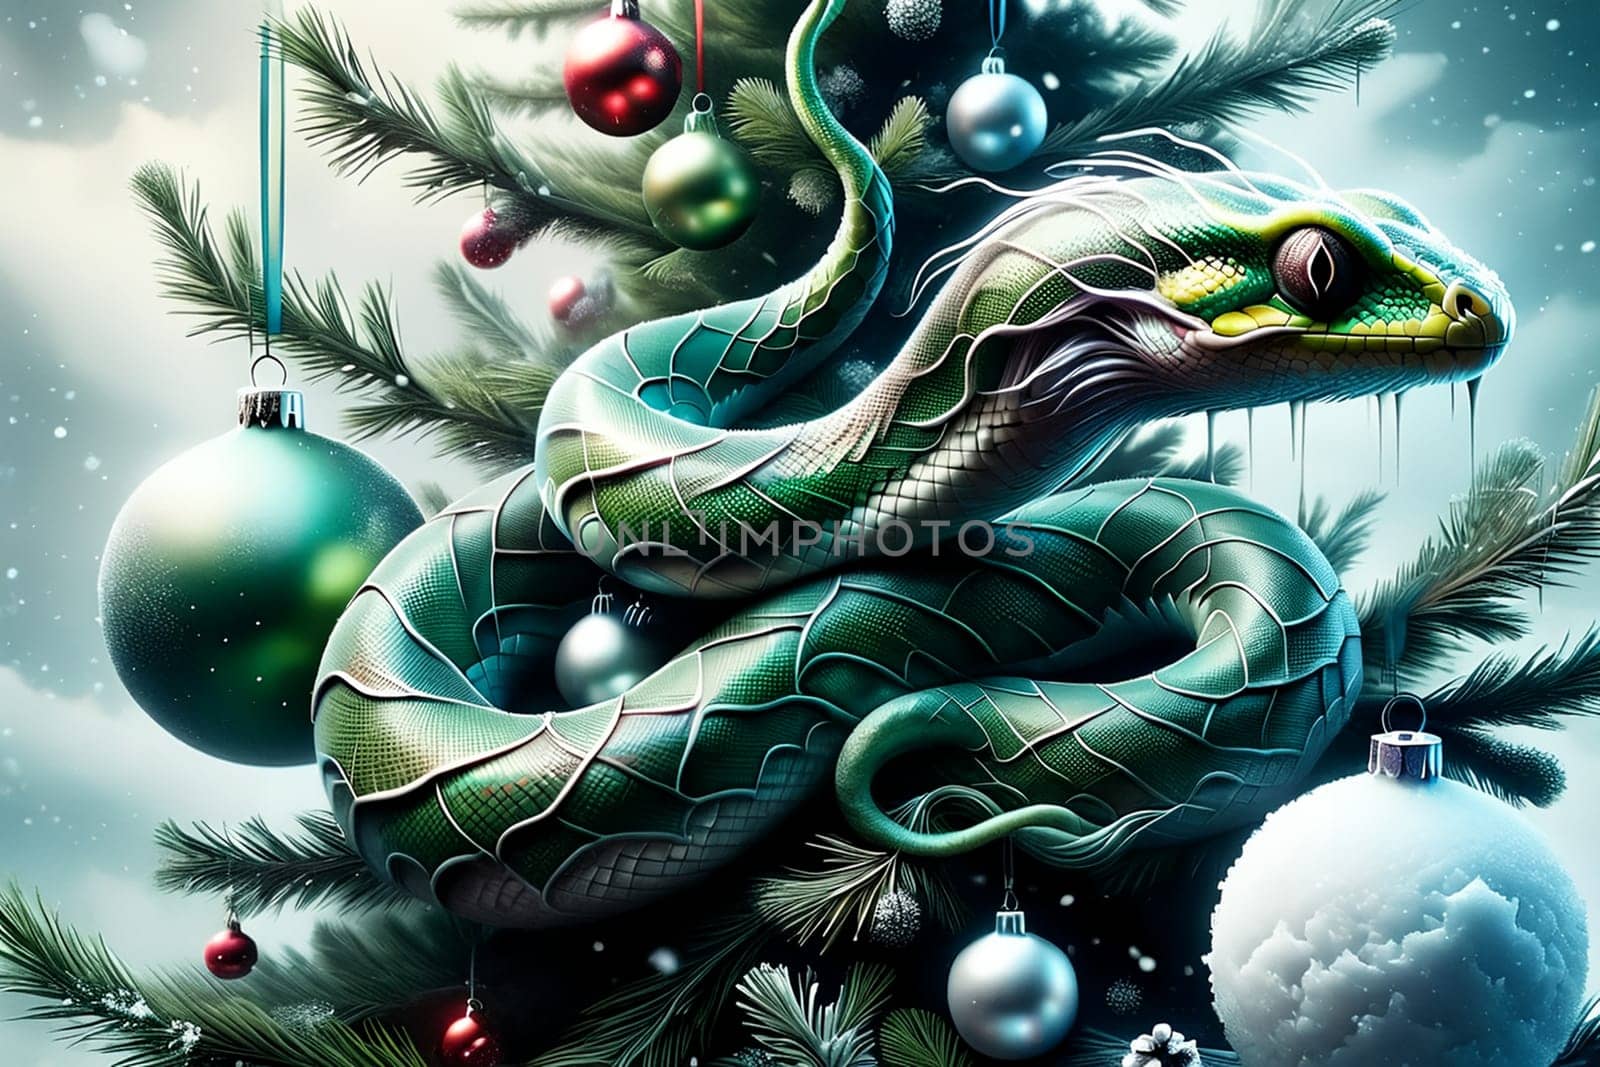 A forest green snake crawls along a Christmas tree with balls. by Rawlik